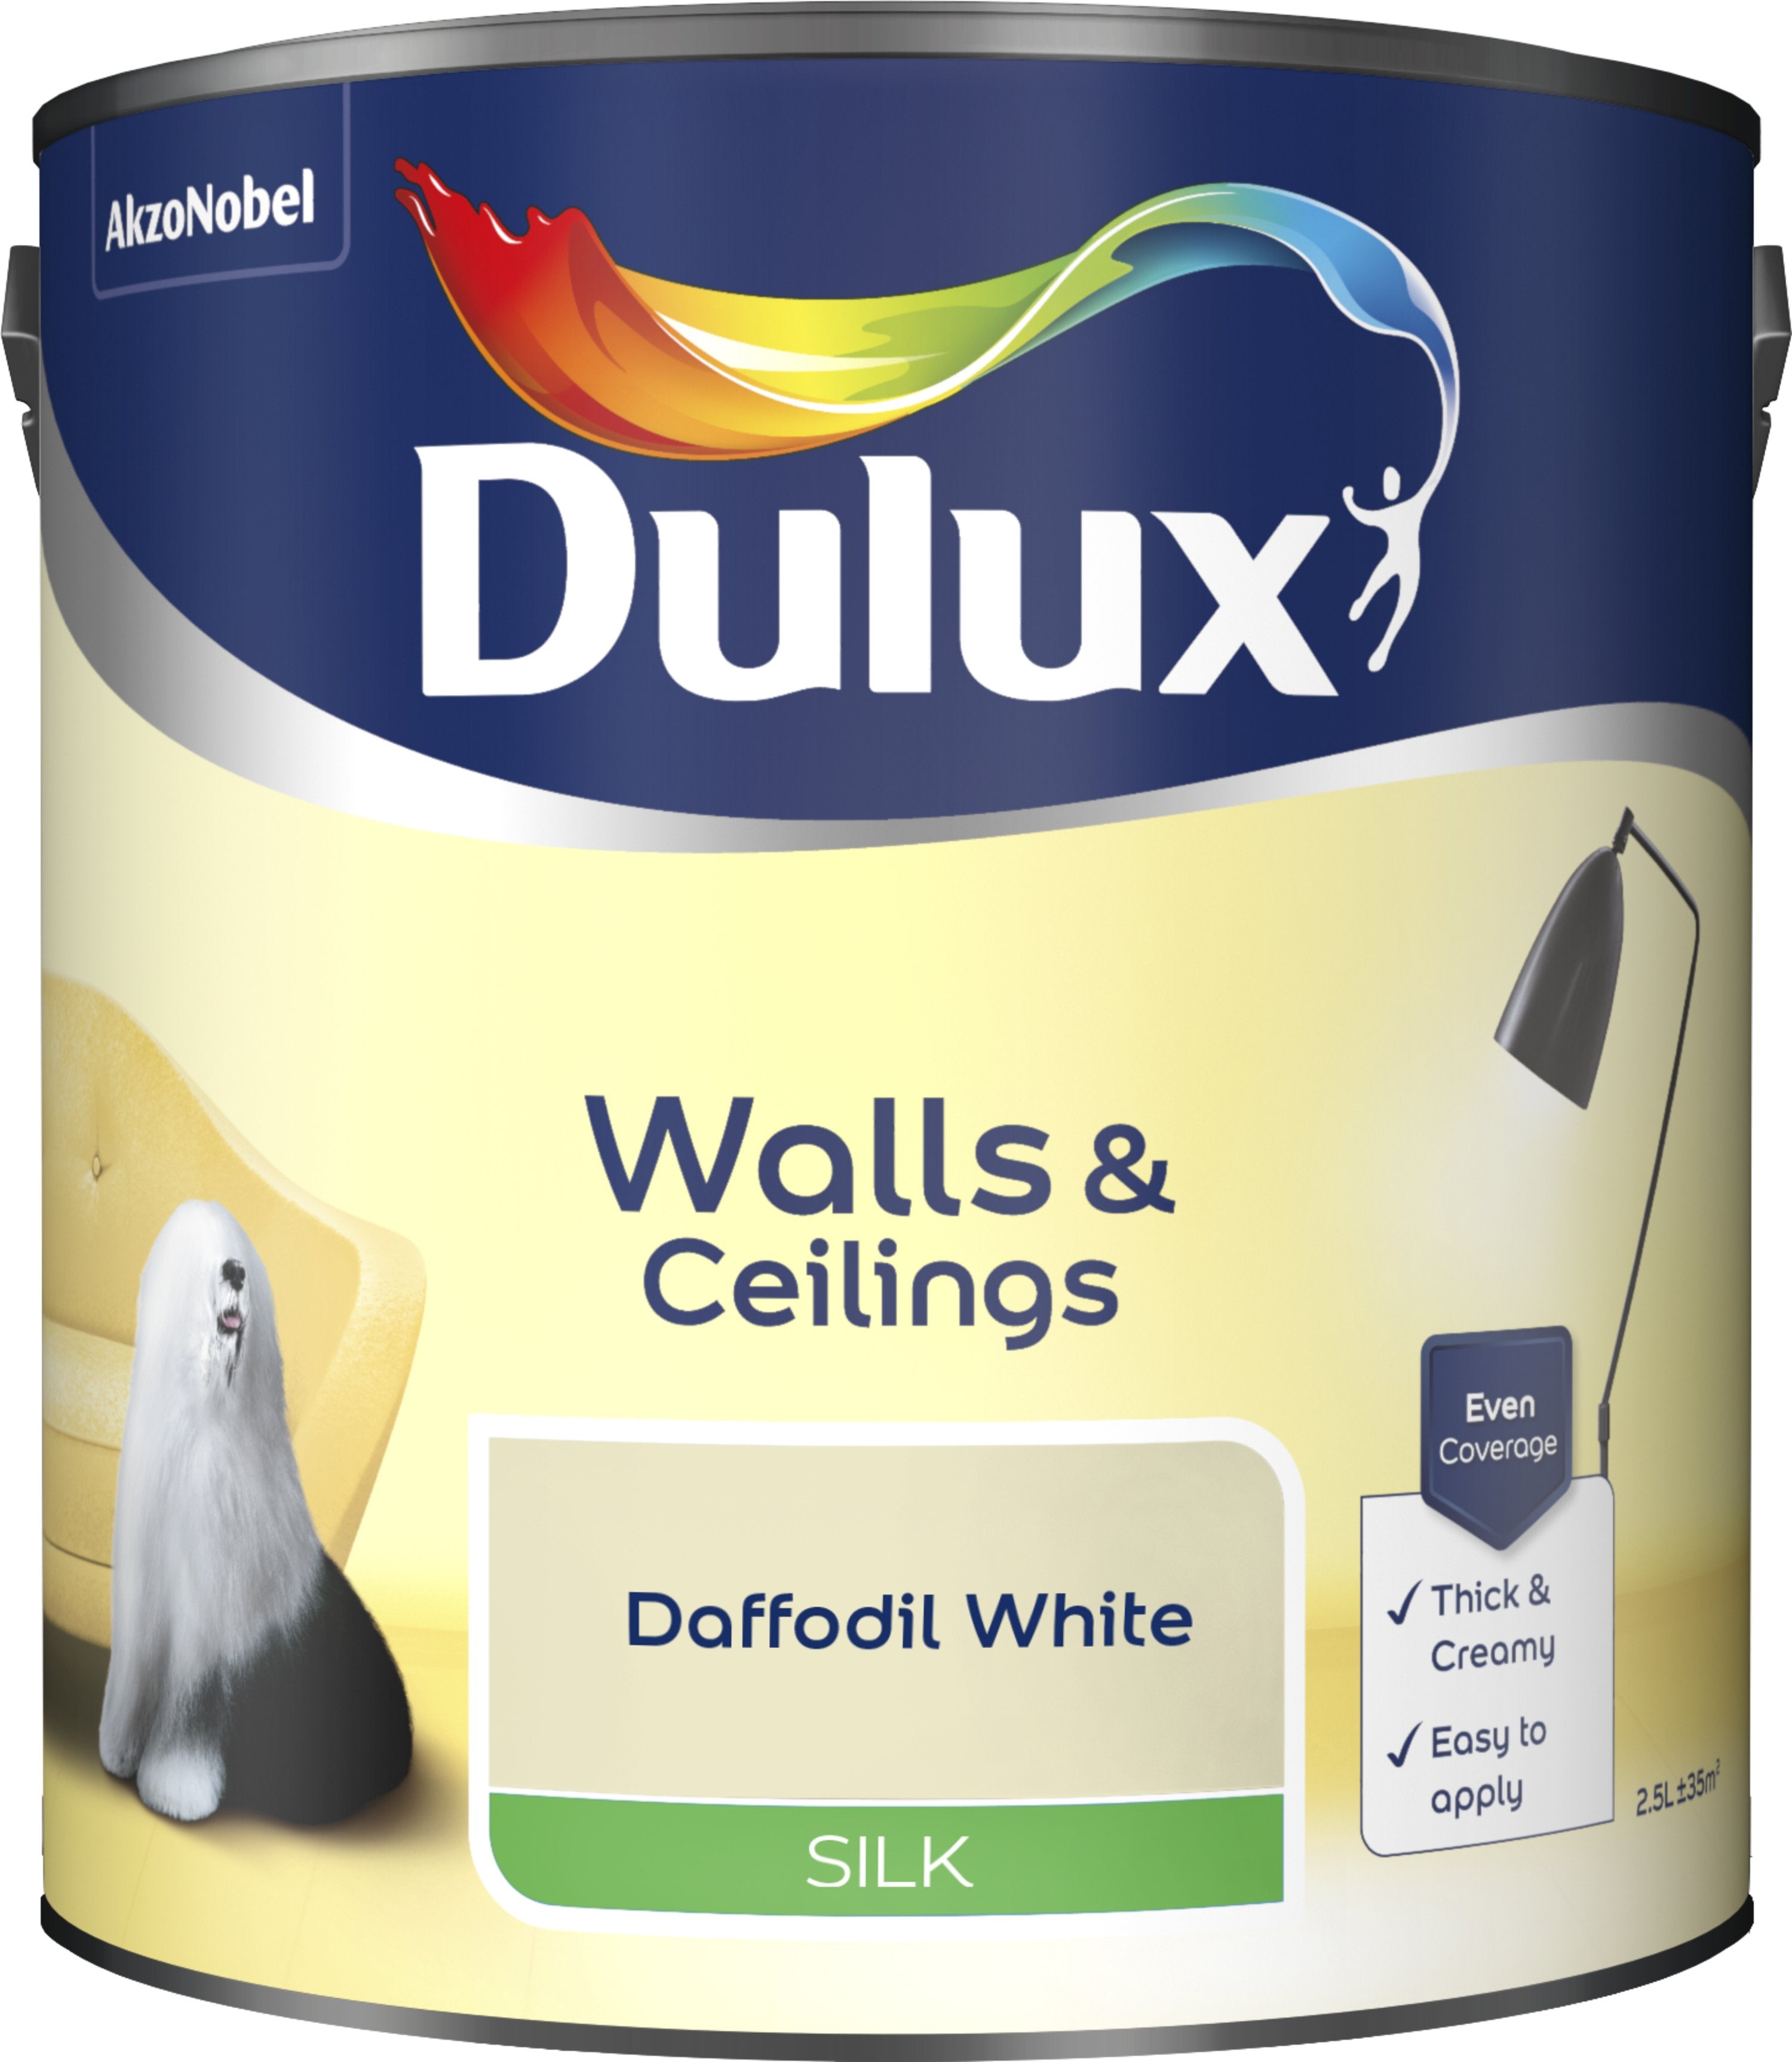 Dulux Silk Emulsion Paint For Walls And Ceilings - Daffodil White 2.5L Garden & Diy Home